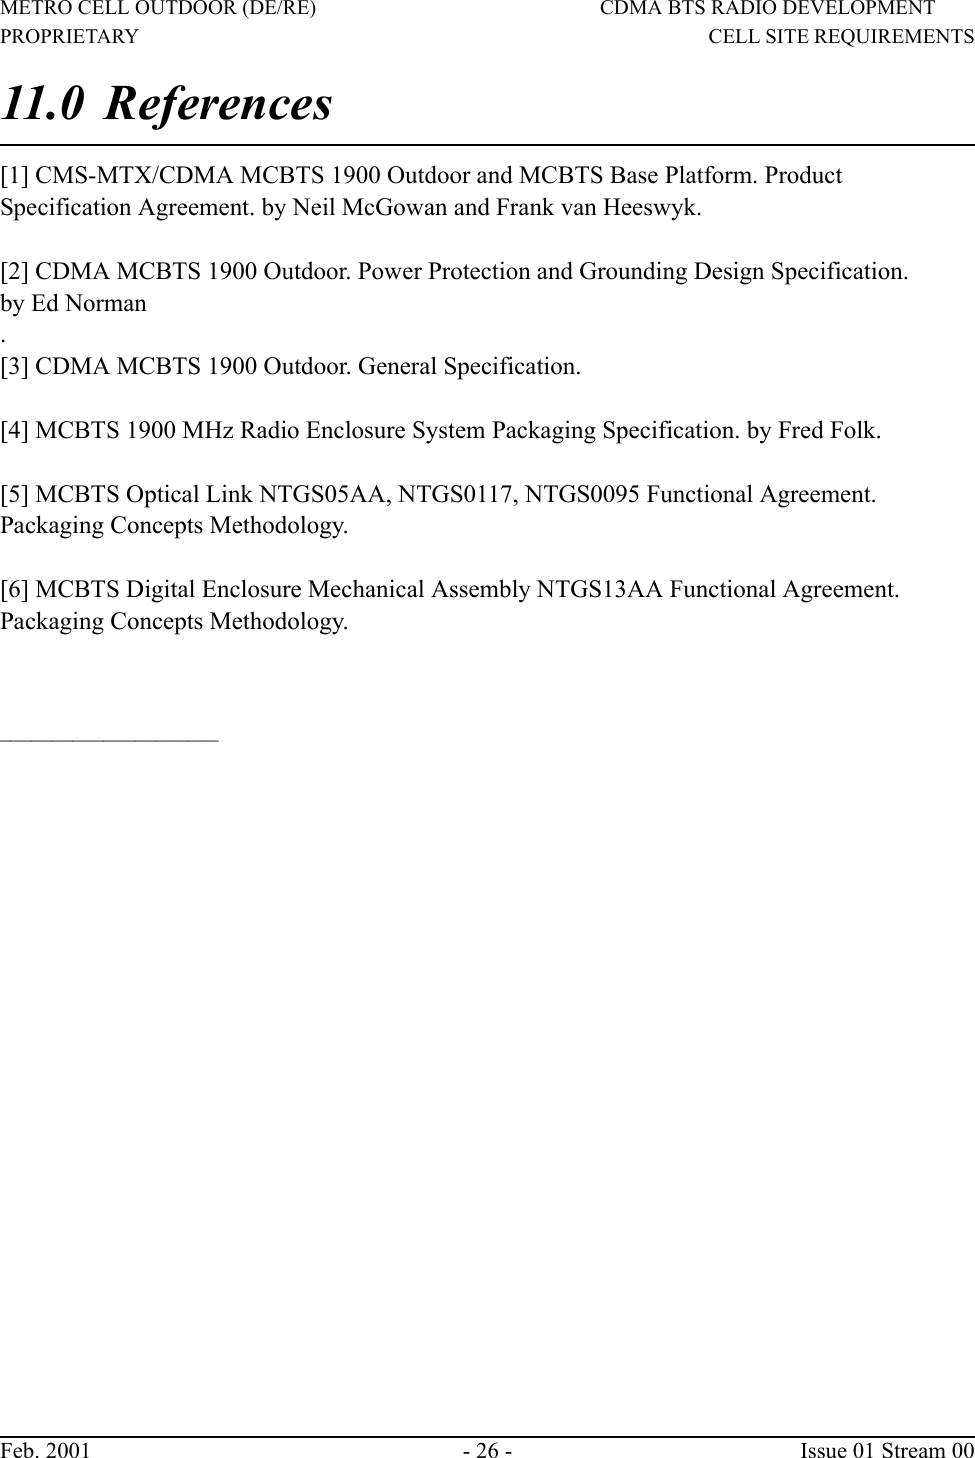 METRO CELL OUTDOOR (DE/RE) CDMA BTS RADIO DEVELOPMENTPROPRIETARY                                        CELL SITE REQUIREMENTSFeb. 2001 - 26 -  Issue 01 Stream 0011.0 References [1] CMS-MTX/CDMA MCBTS 1900 Outdoor and MCBTS Base Platform. ProductSpecification Agreement. by Neil McGowan and Frank van Heeswyk.[2] CDMA MCBTS 1900 Outdoor. Power Protection and Grounding Design Specification.by Ed Norman.[3] CDMA MCBTS 1900 Outdoor. General Specification.[4] MCBTS 1900 MHz Radio Enclosure System Packaging Specification. by Fred Folk.[5] MCBTS Optical Link NTGS05AA, NTGS0117, NTGS0095 Functional Agreement.Packaging Concepts Methodology.[6] MCBTS Digital Enclosure Mechanical Assembly NTGS13AA Functional Agreement.Packaging Concepts Methodology._____________________